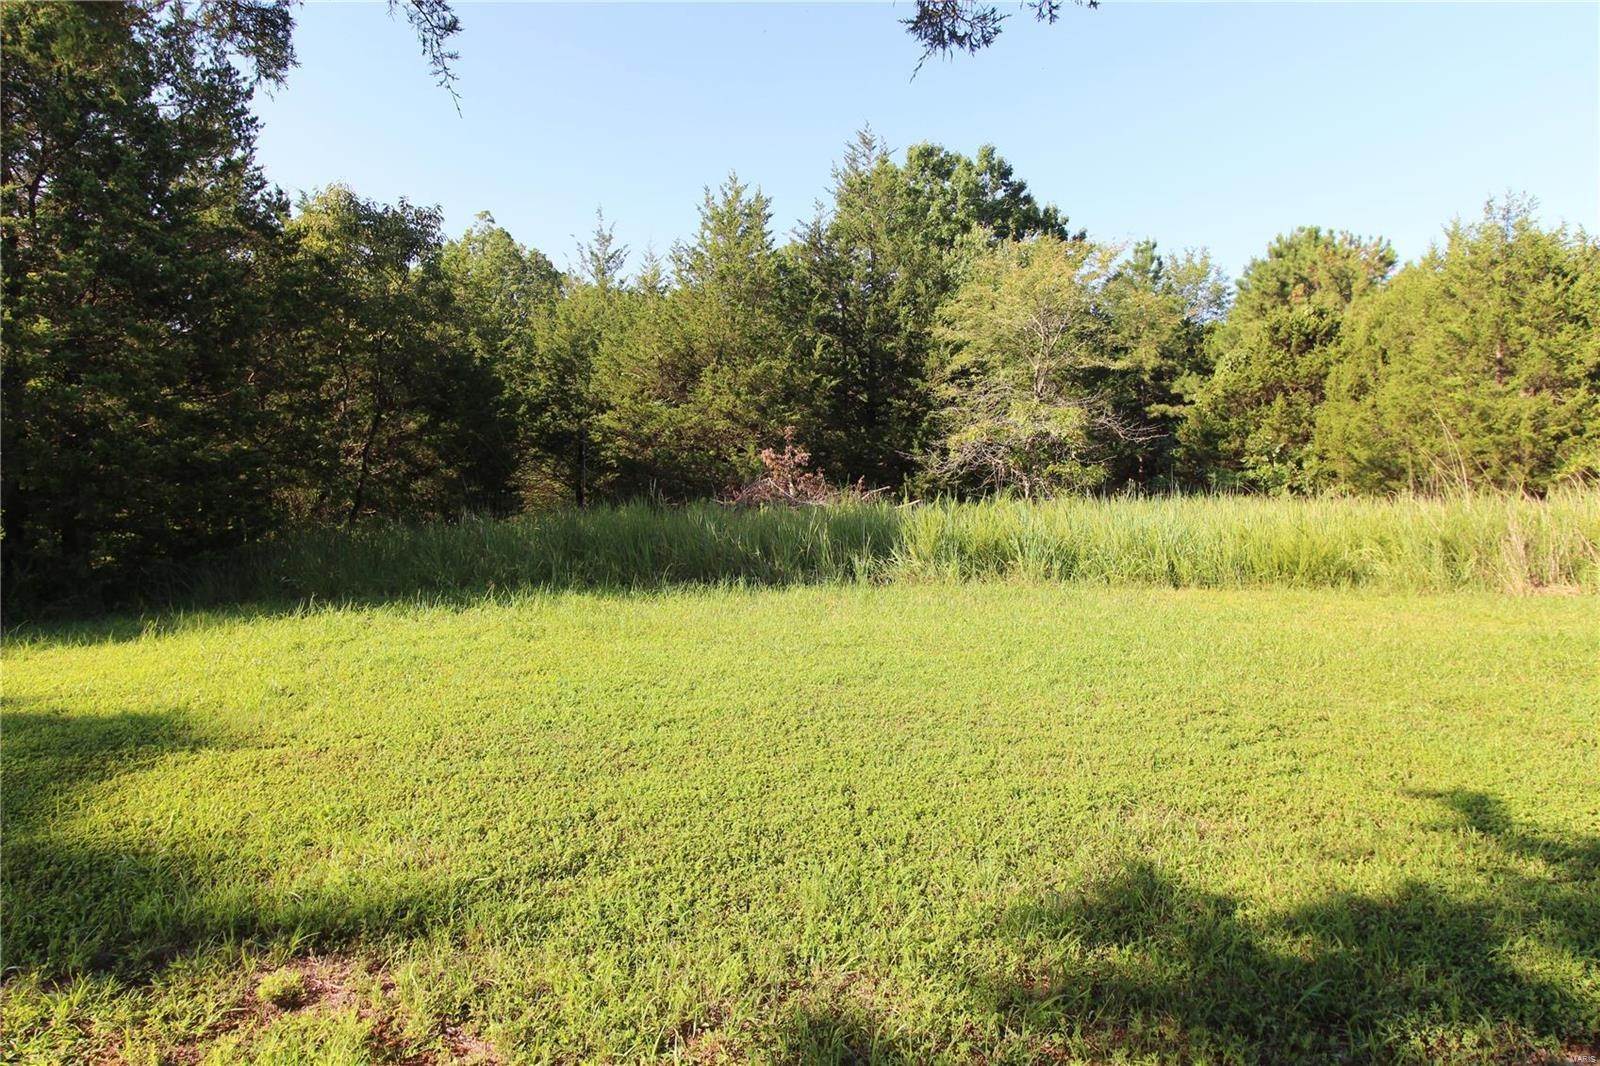 Property for Sale at Lot 37 Picadilly Drive De Soto, Missouri 63020 United States